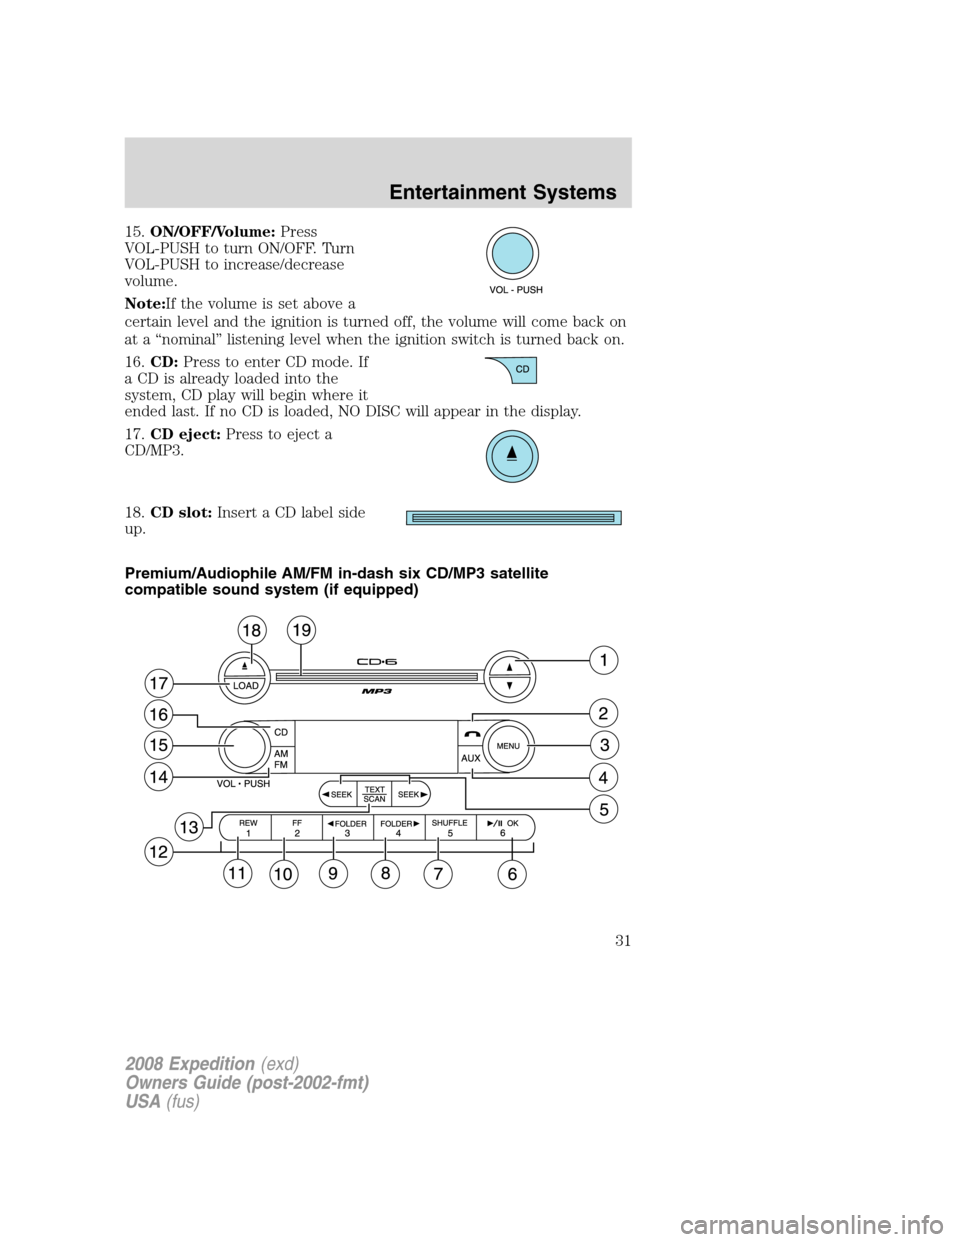 FORD EXPEDITION 2008 3.G Owners Guide 15.ON/OFF/Volume:Press
VOL-PUSH to turn ON/OFF. Turn
VOL-PUSH to increase/decrease
volume.
Note:If the volume is set above a
certain level and the ignition is turned off, the volume will come back on
